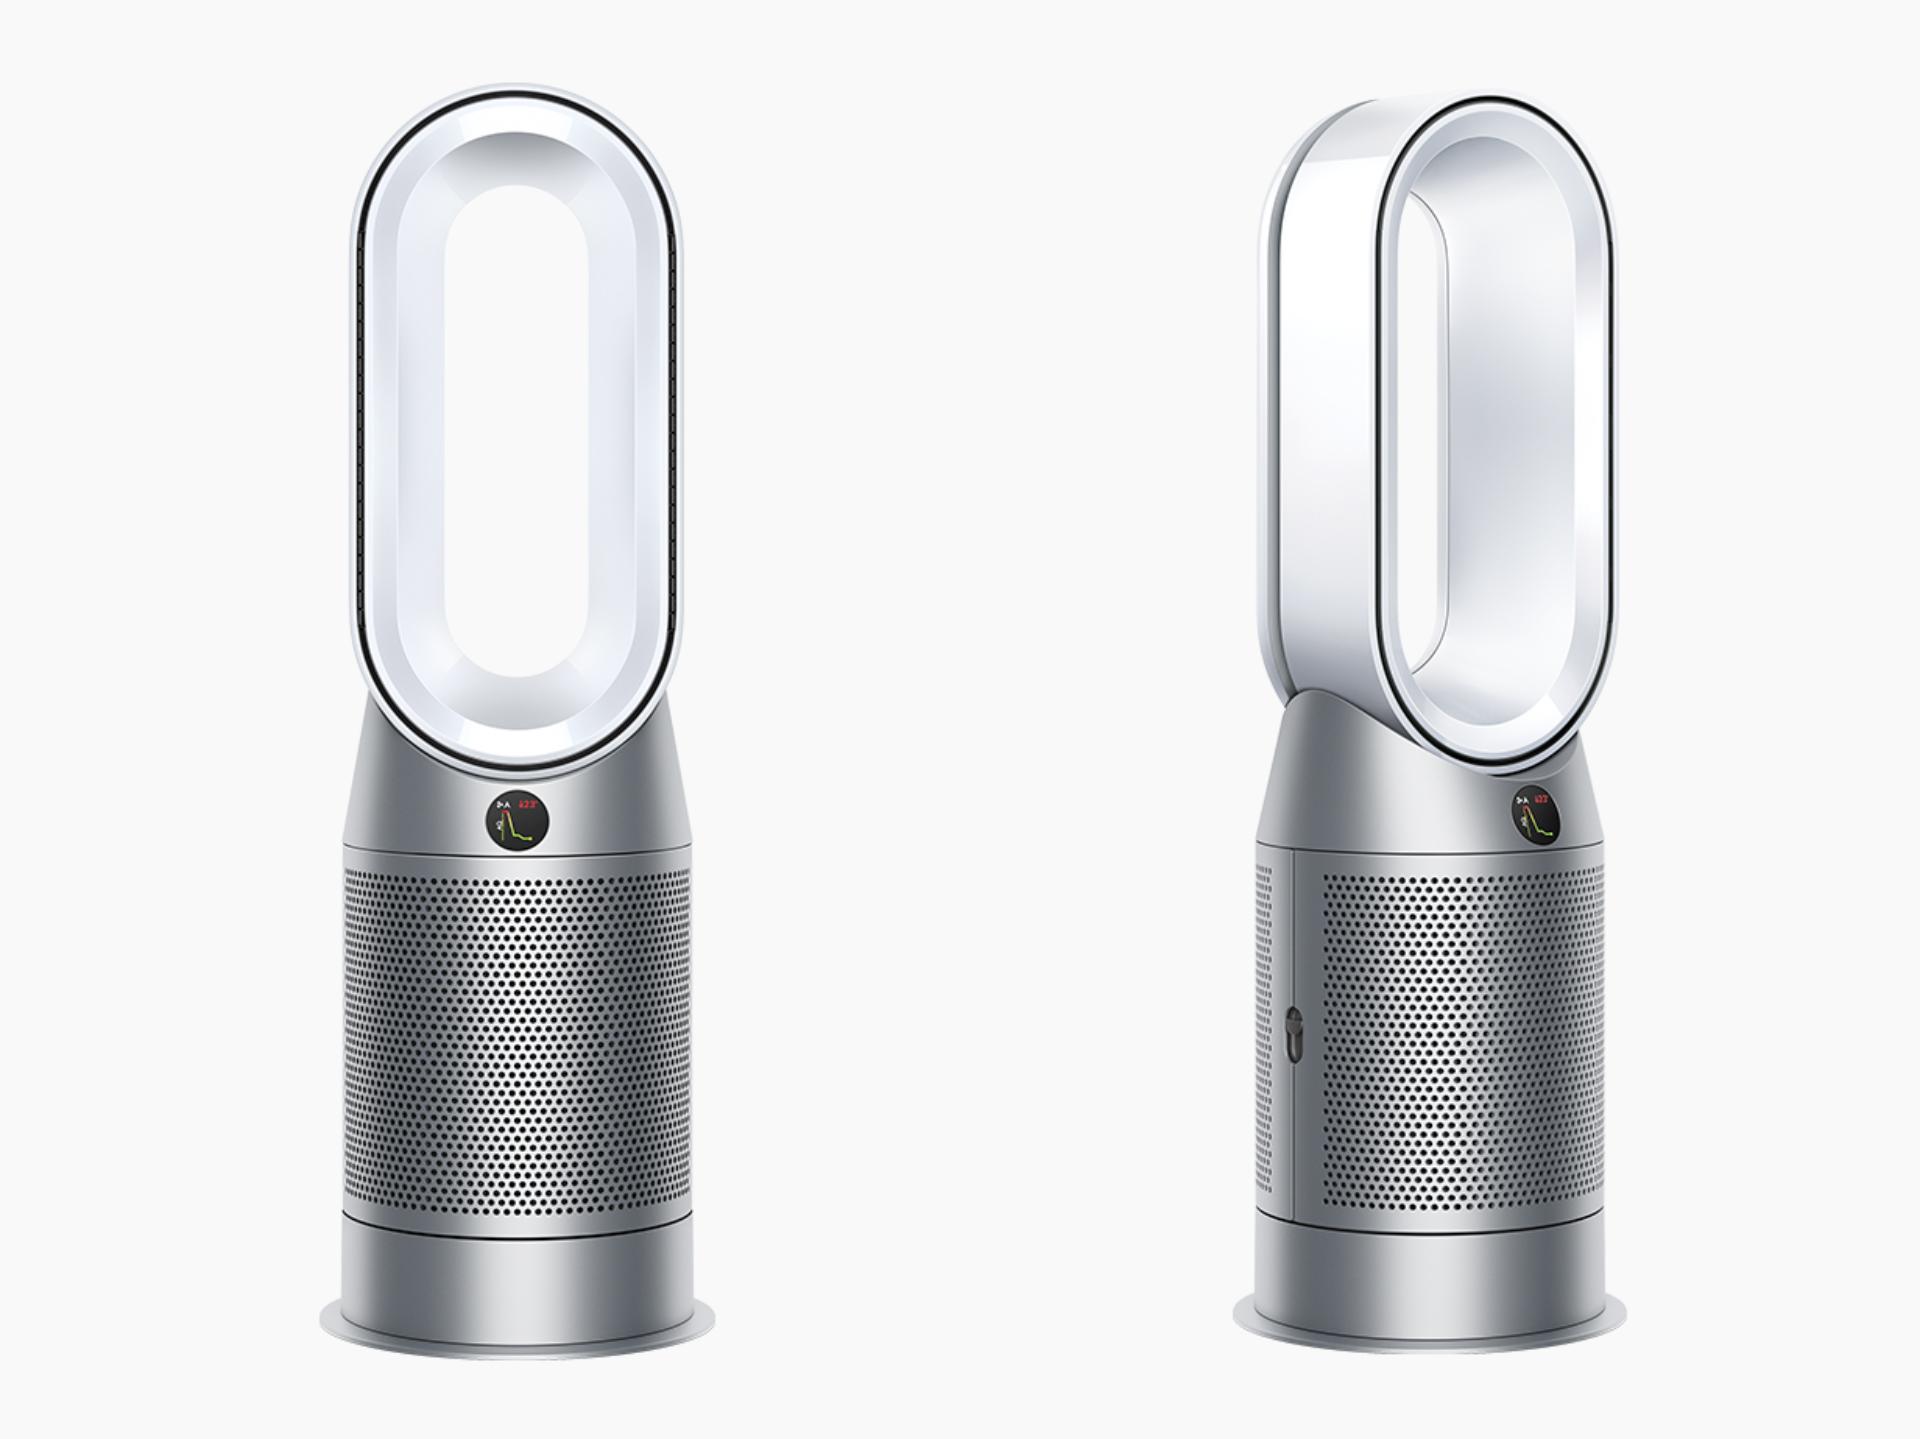 Dyson Purifier Hot+Cool front and side views